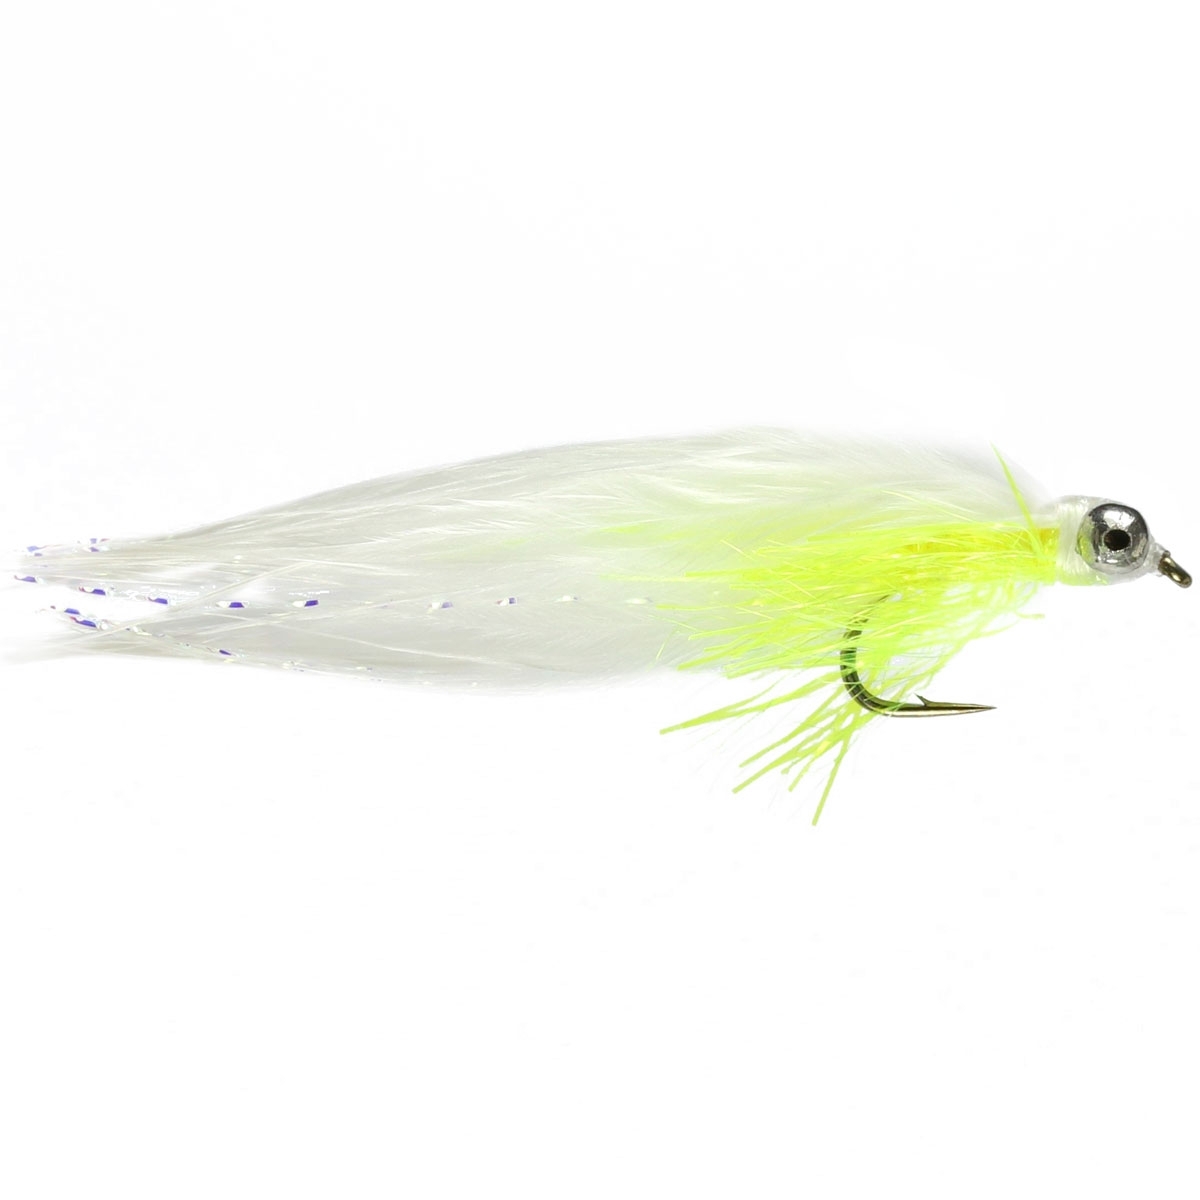 White Cats Whisker - Trout Lures - Trout Flies